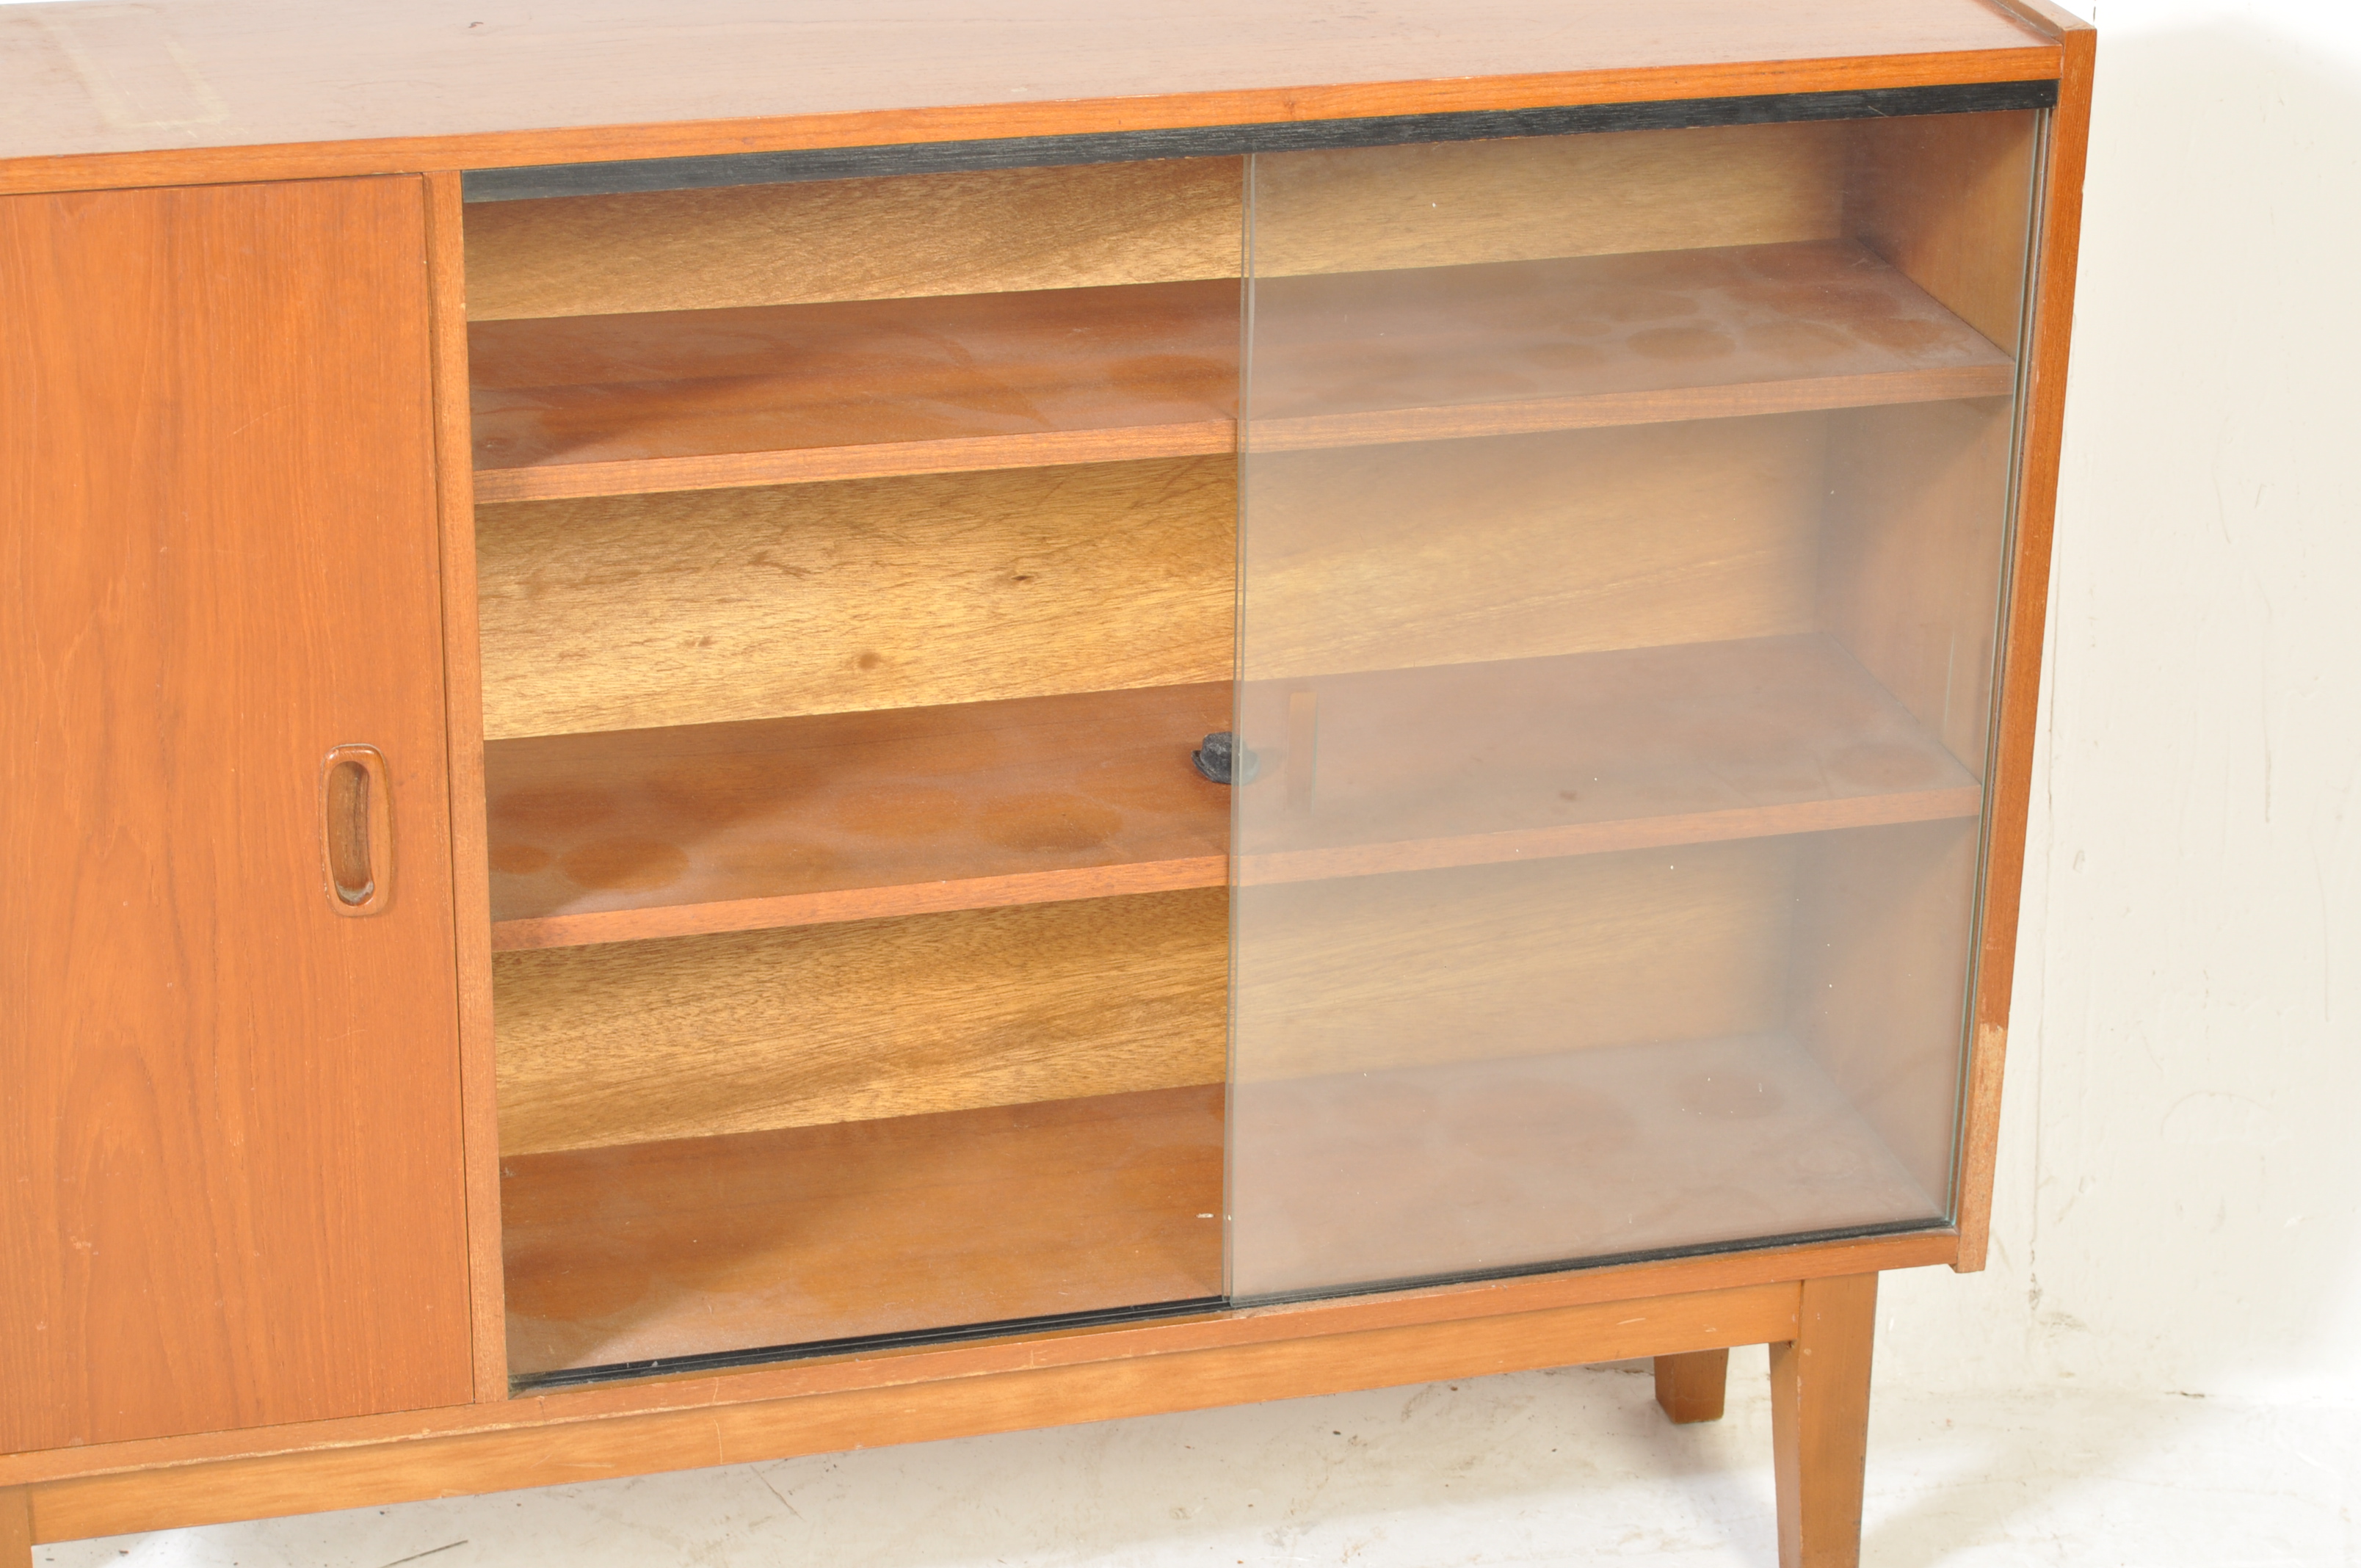 MID 20TH CENTURY TEAK WOOD AND GLASS BOOKCASE / DISPLAY CABINET - Image 5 of 6